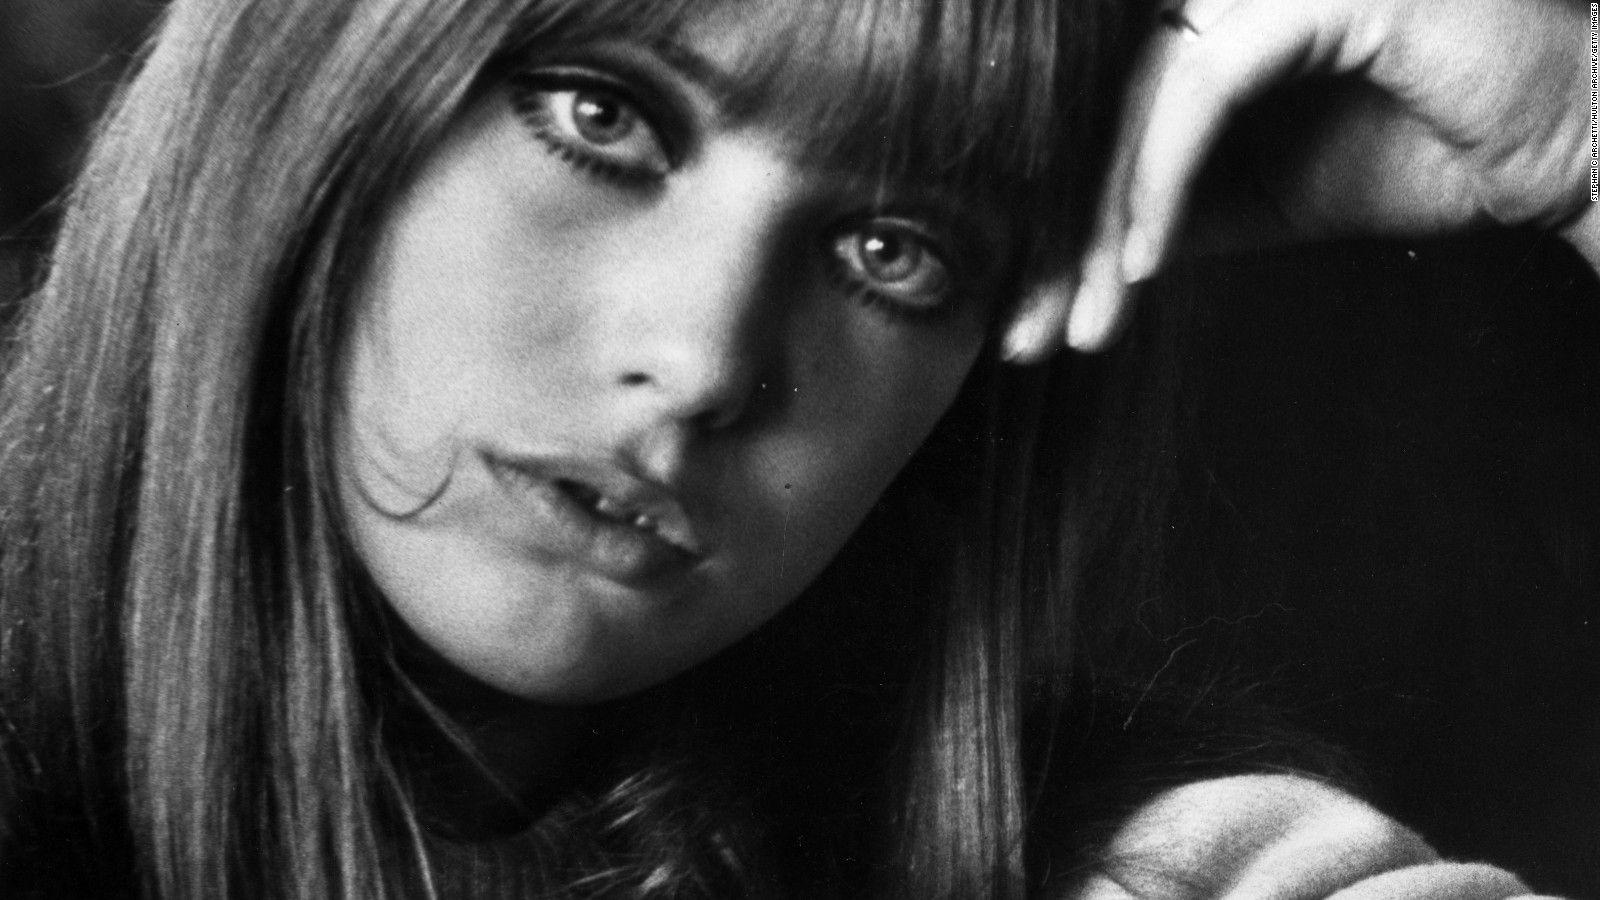 The English girl who became a French icon